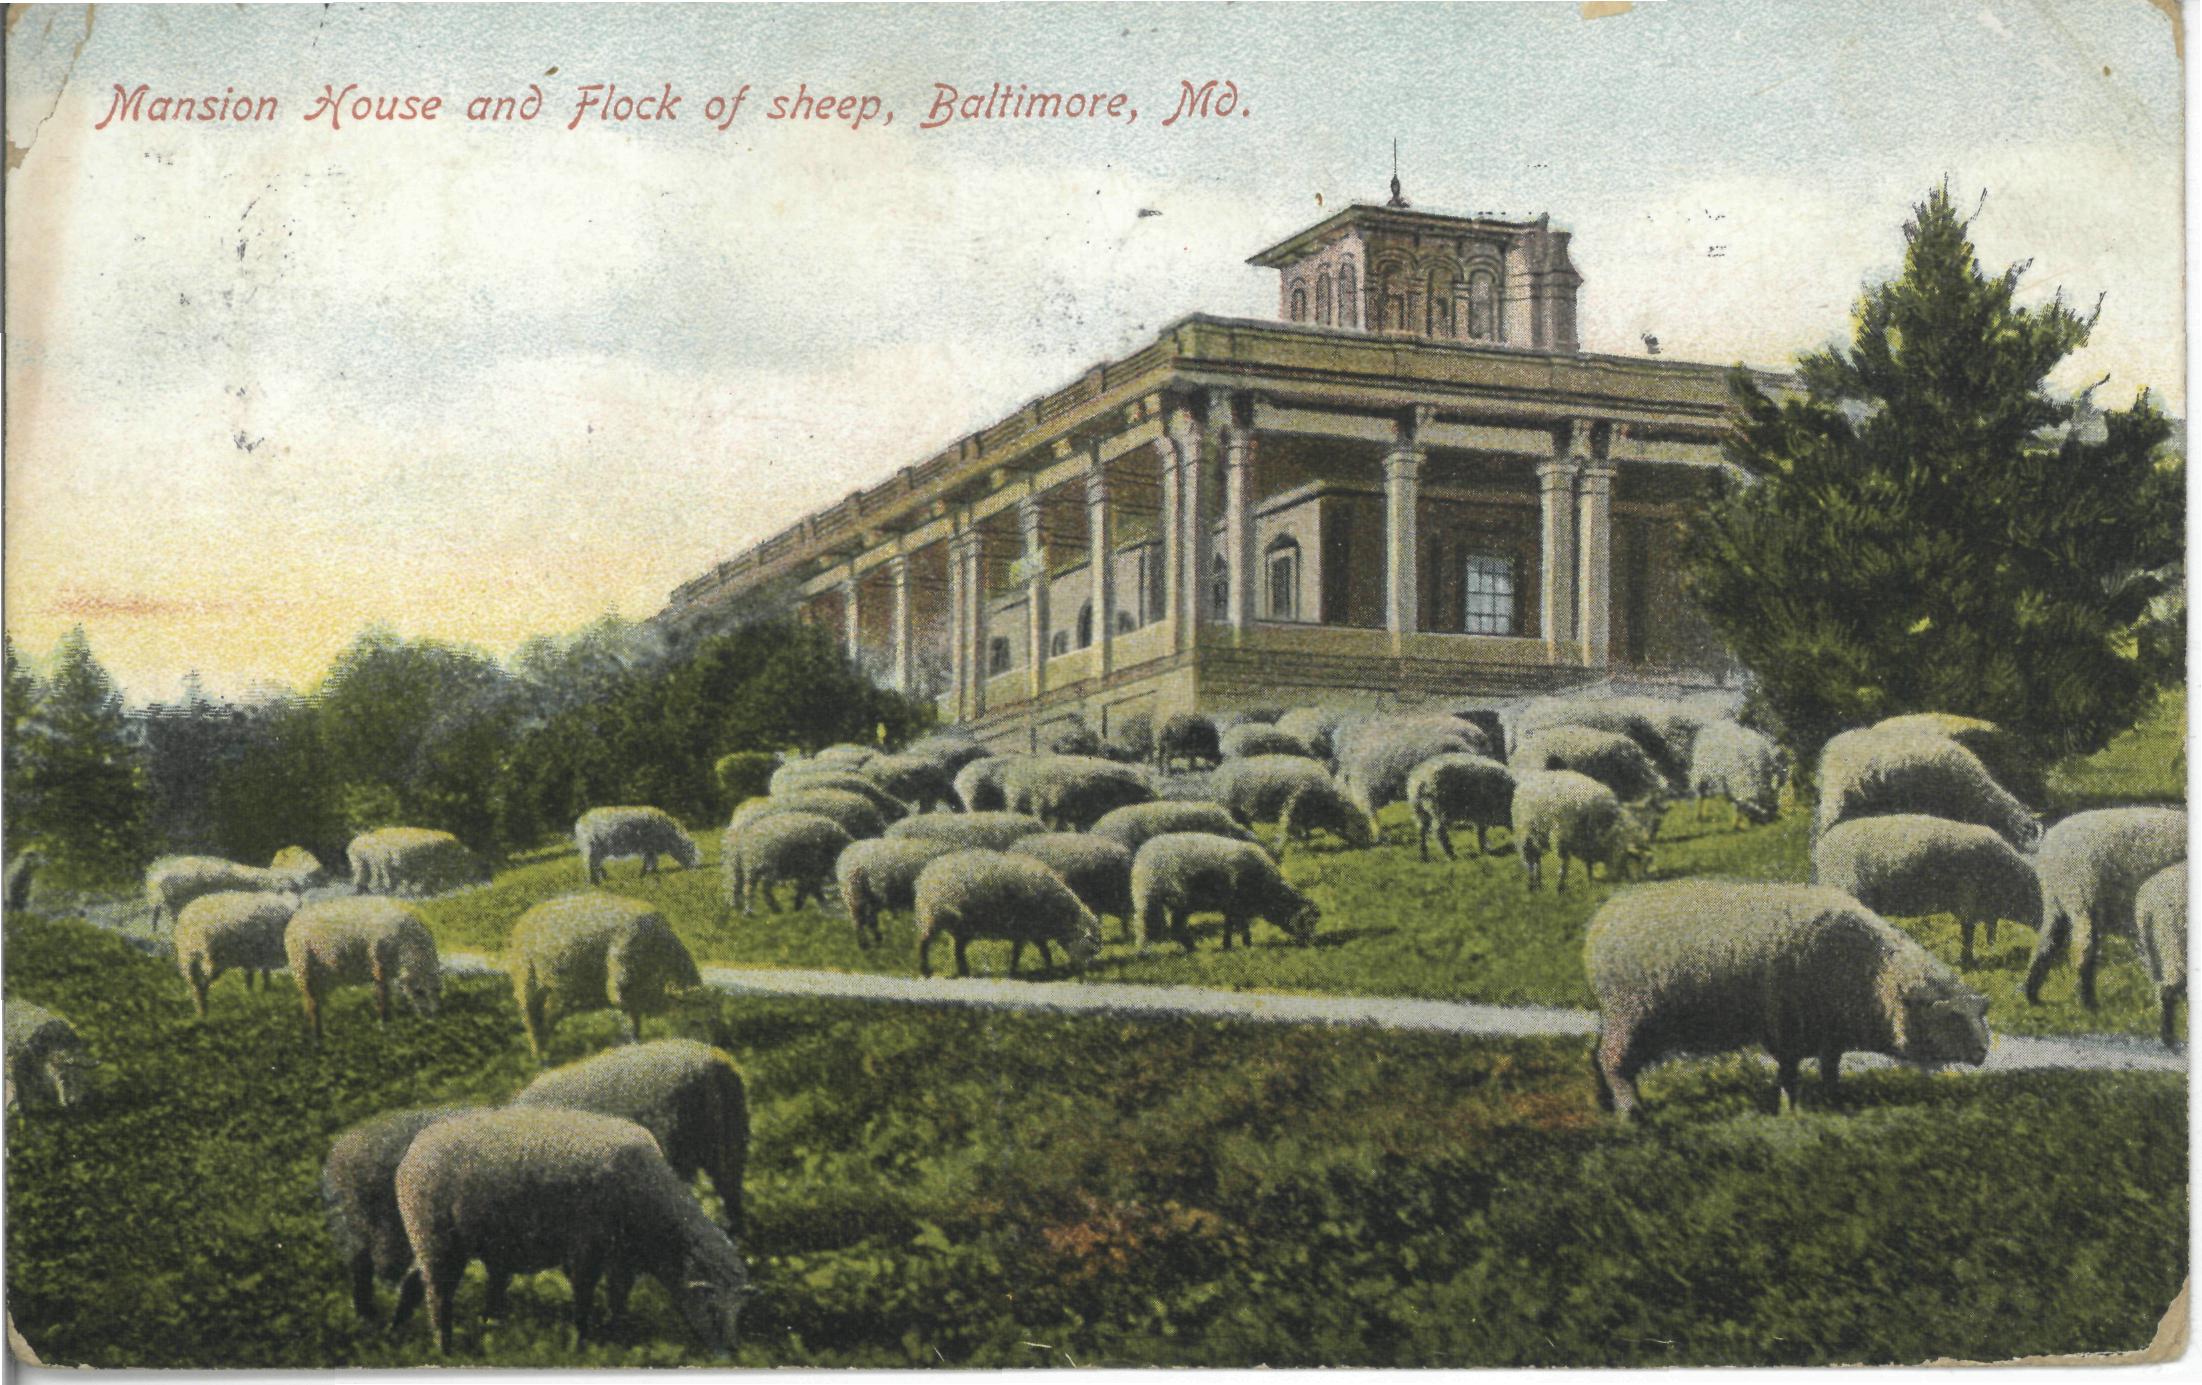 Postcard of Sheep and Mansion House in Druid Hill Park